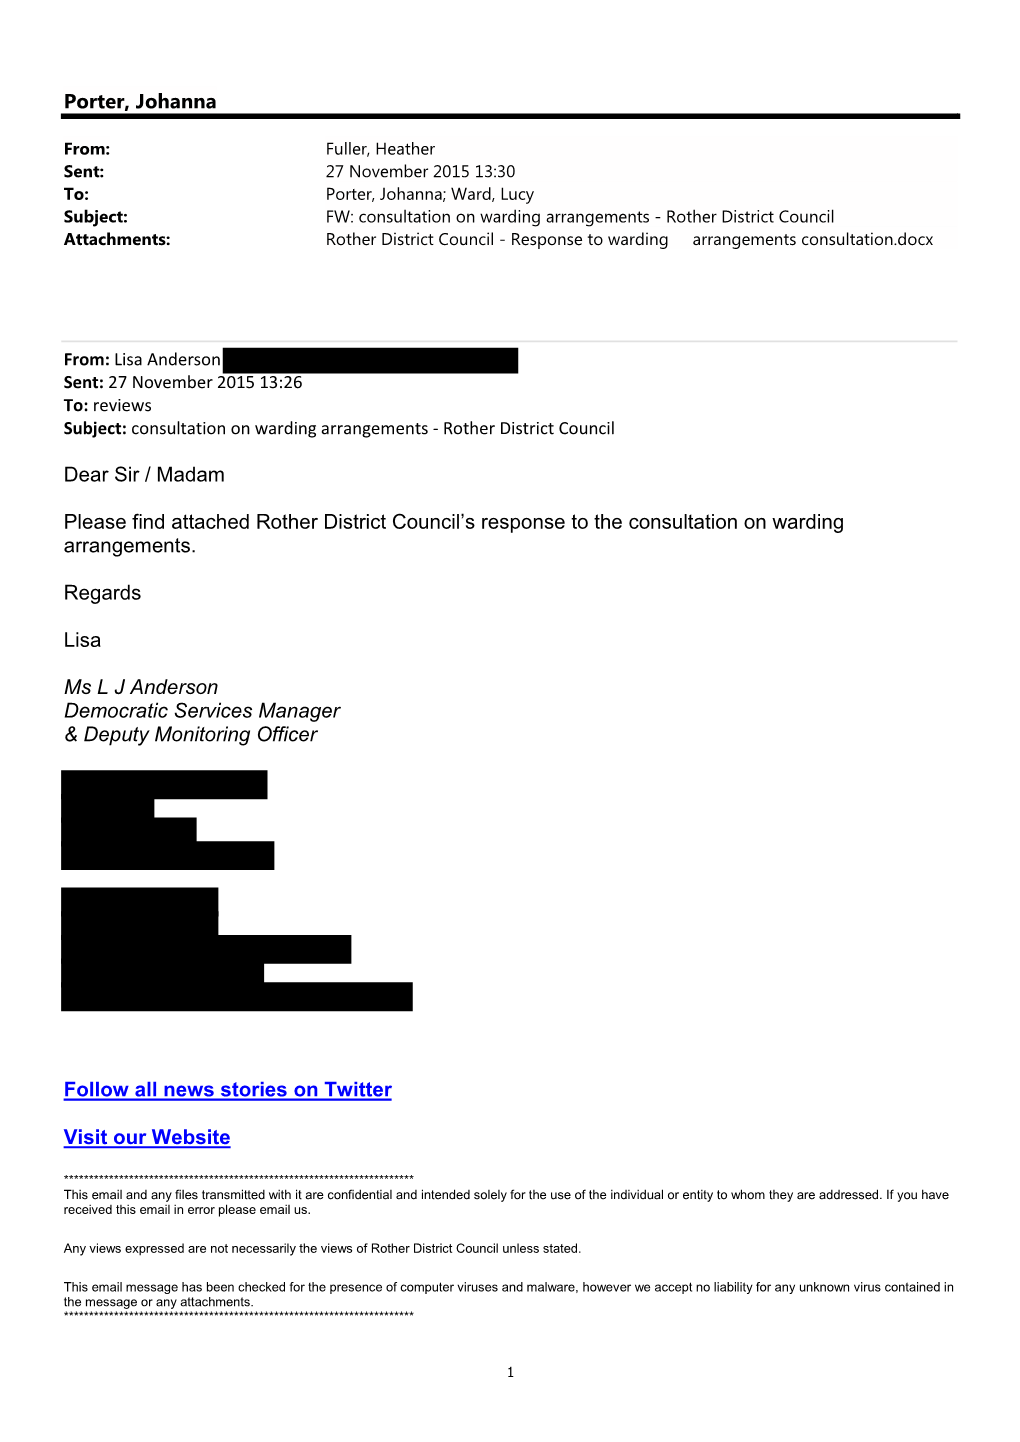 Rother District Council Attachments: Rother District Council - Response to Warding Arrangements Consultation.Docx